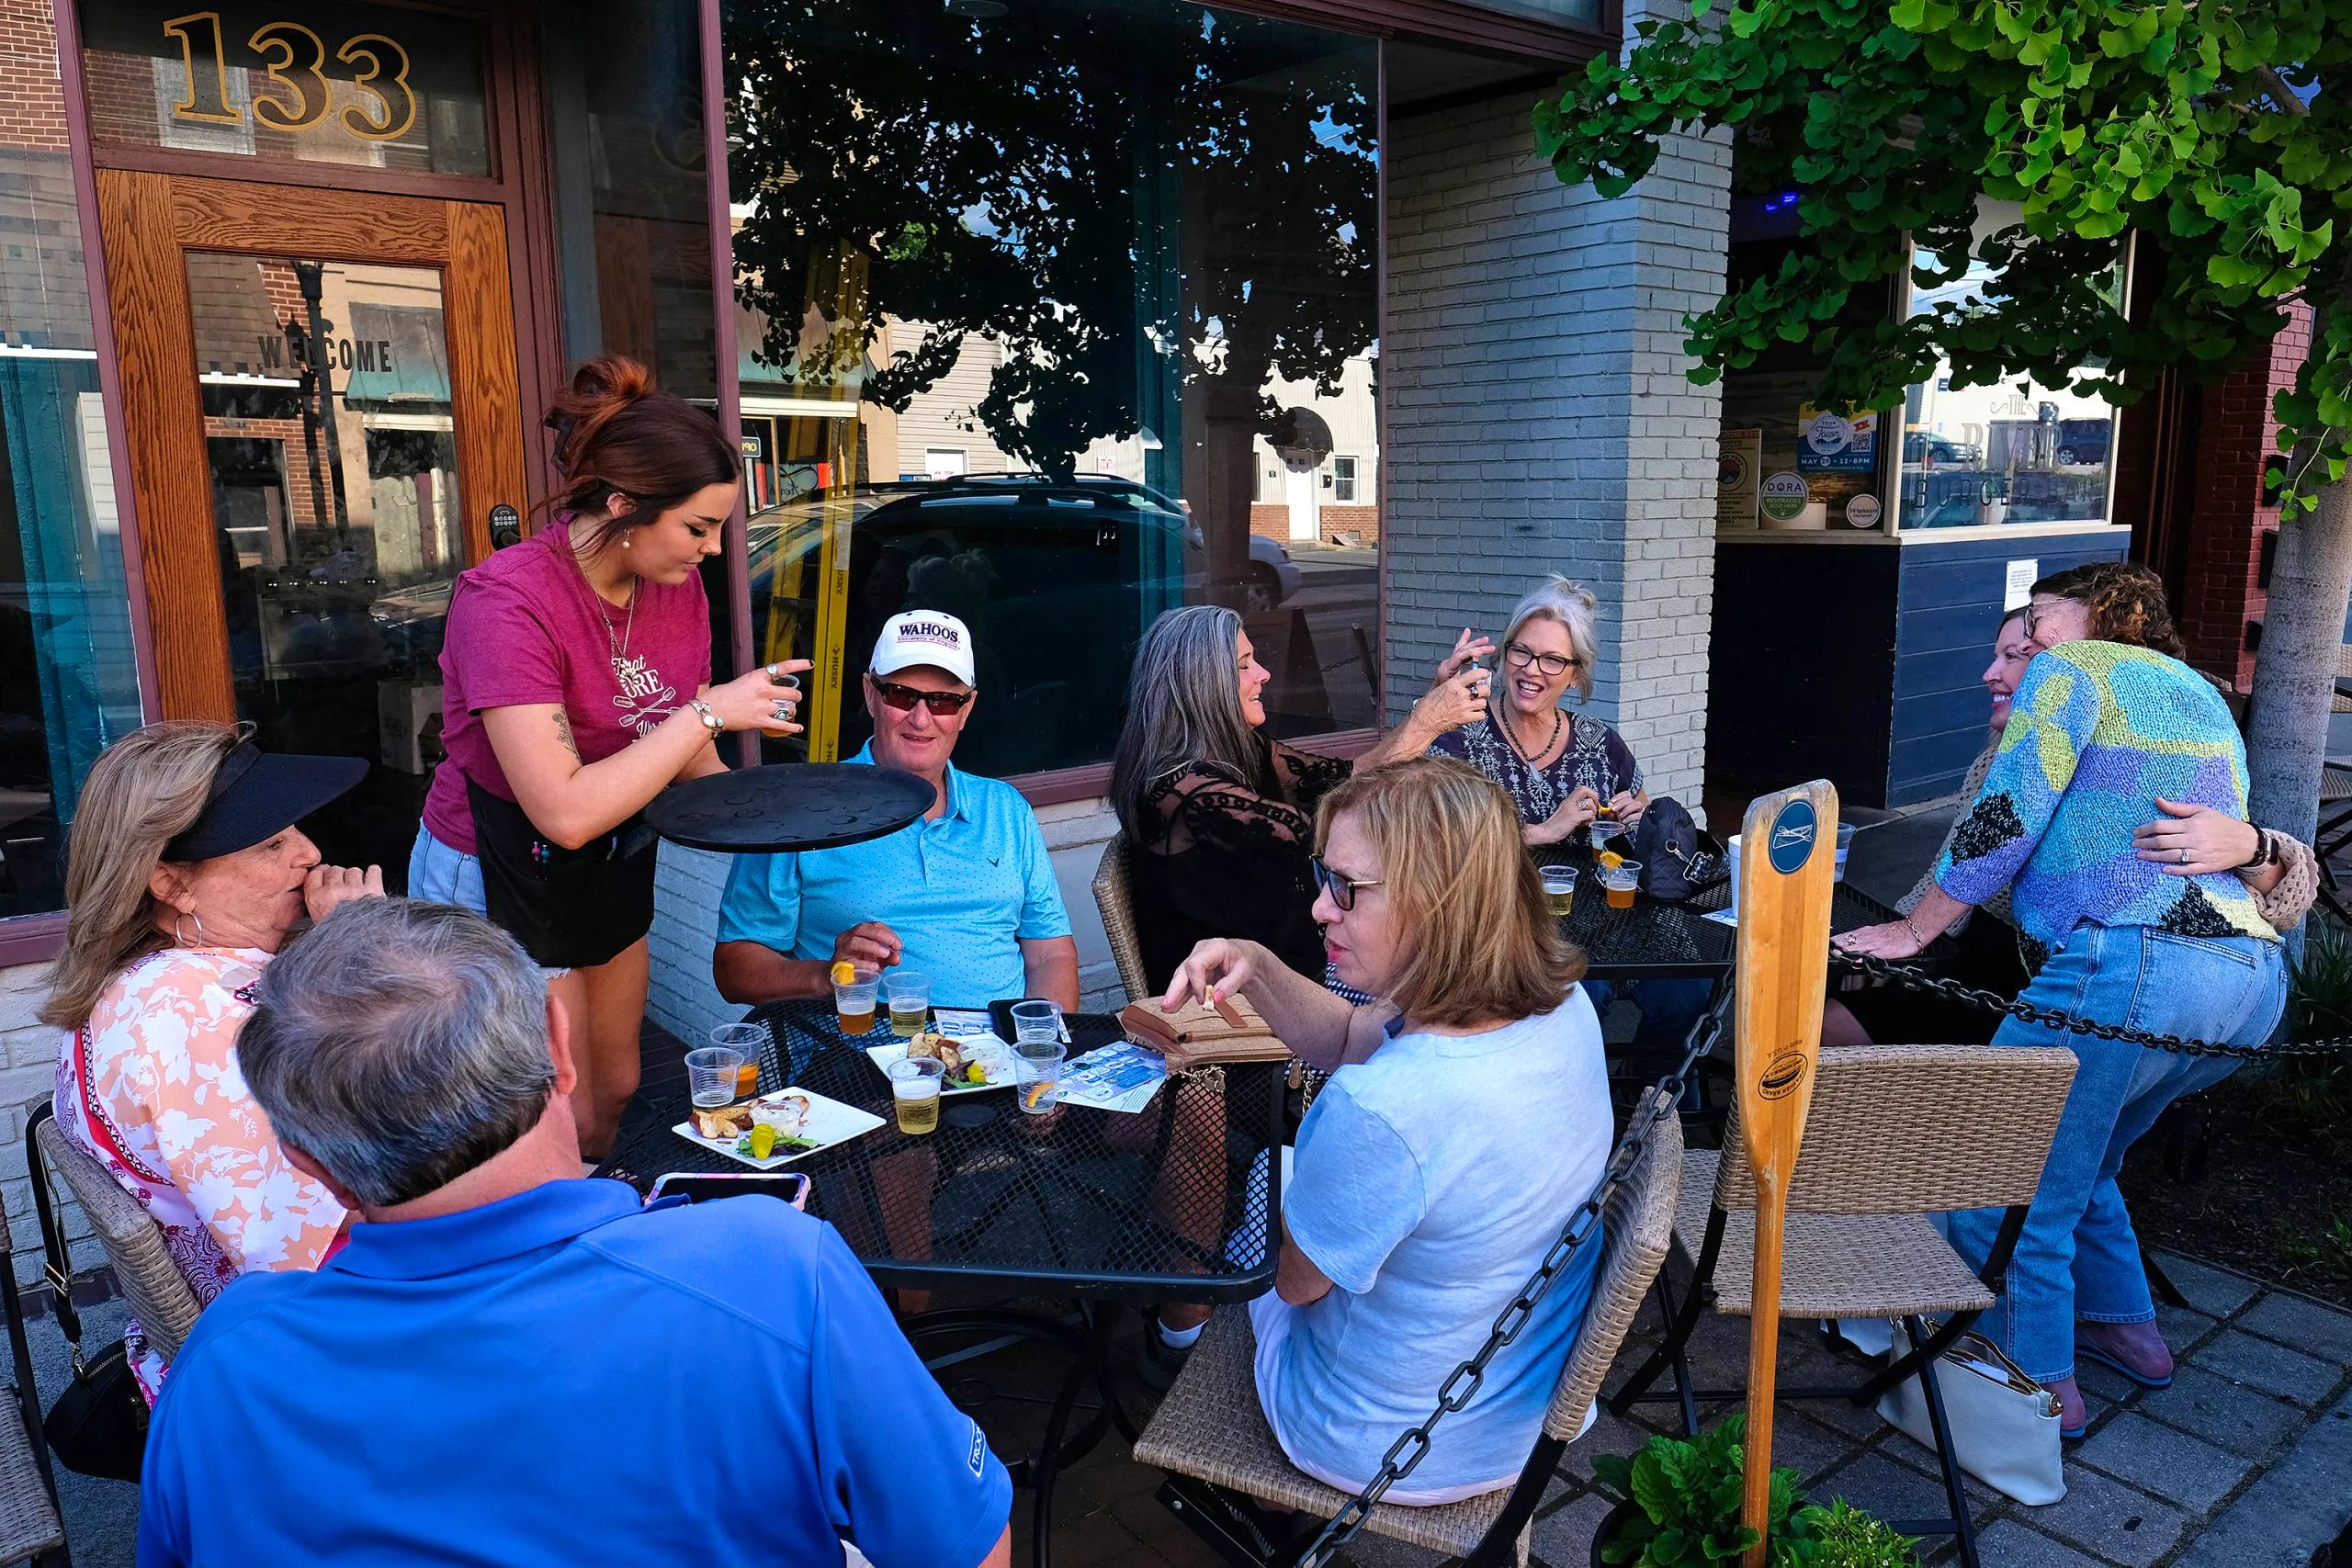 A group of diners at The River Burger Bar's outdoor seating on a city street. A server is passing out drinks.